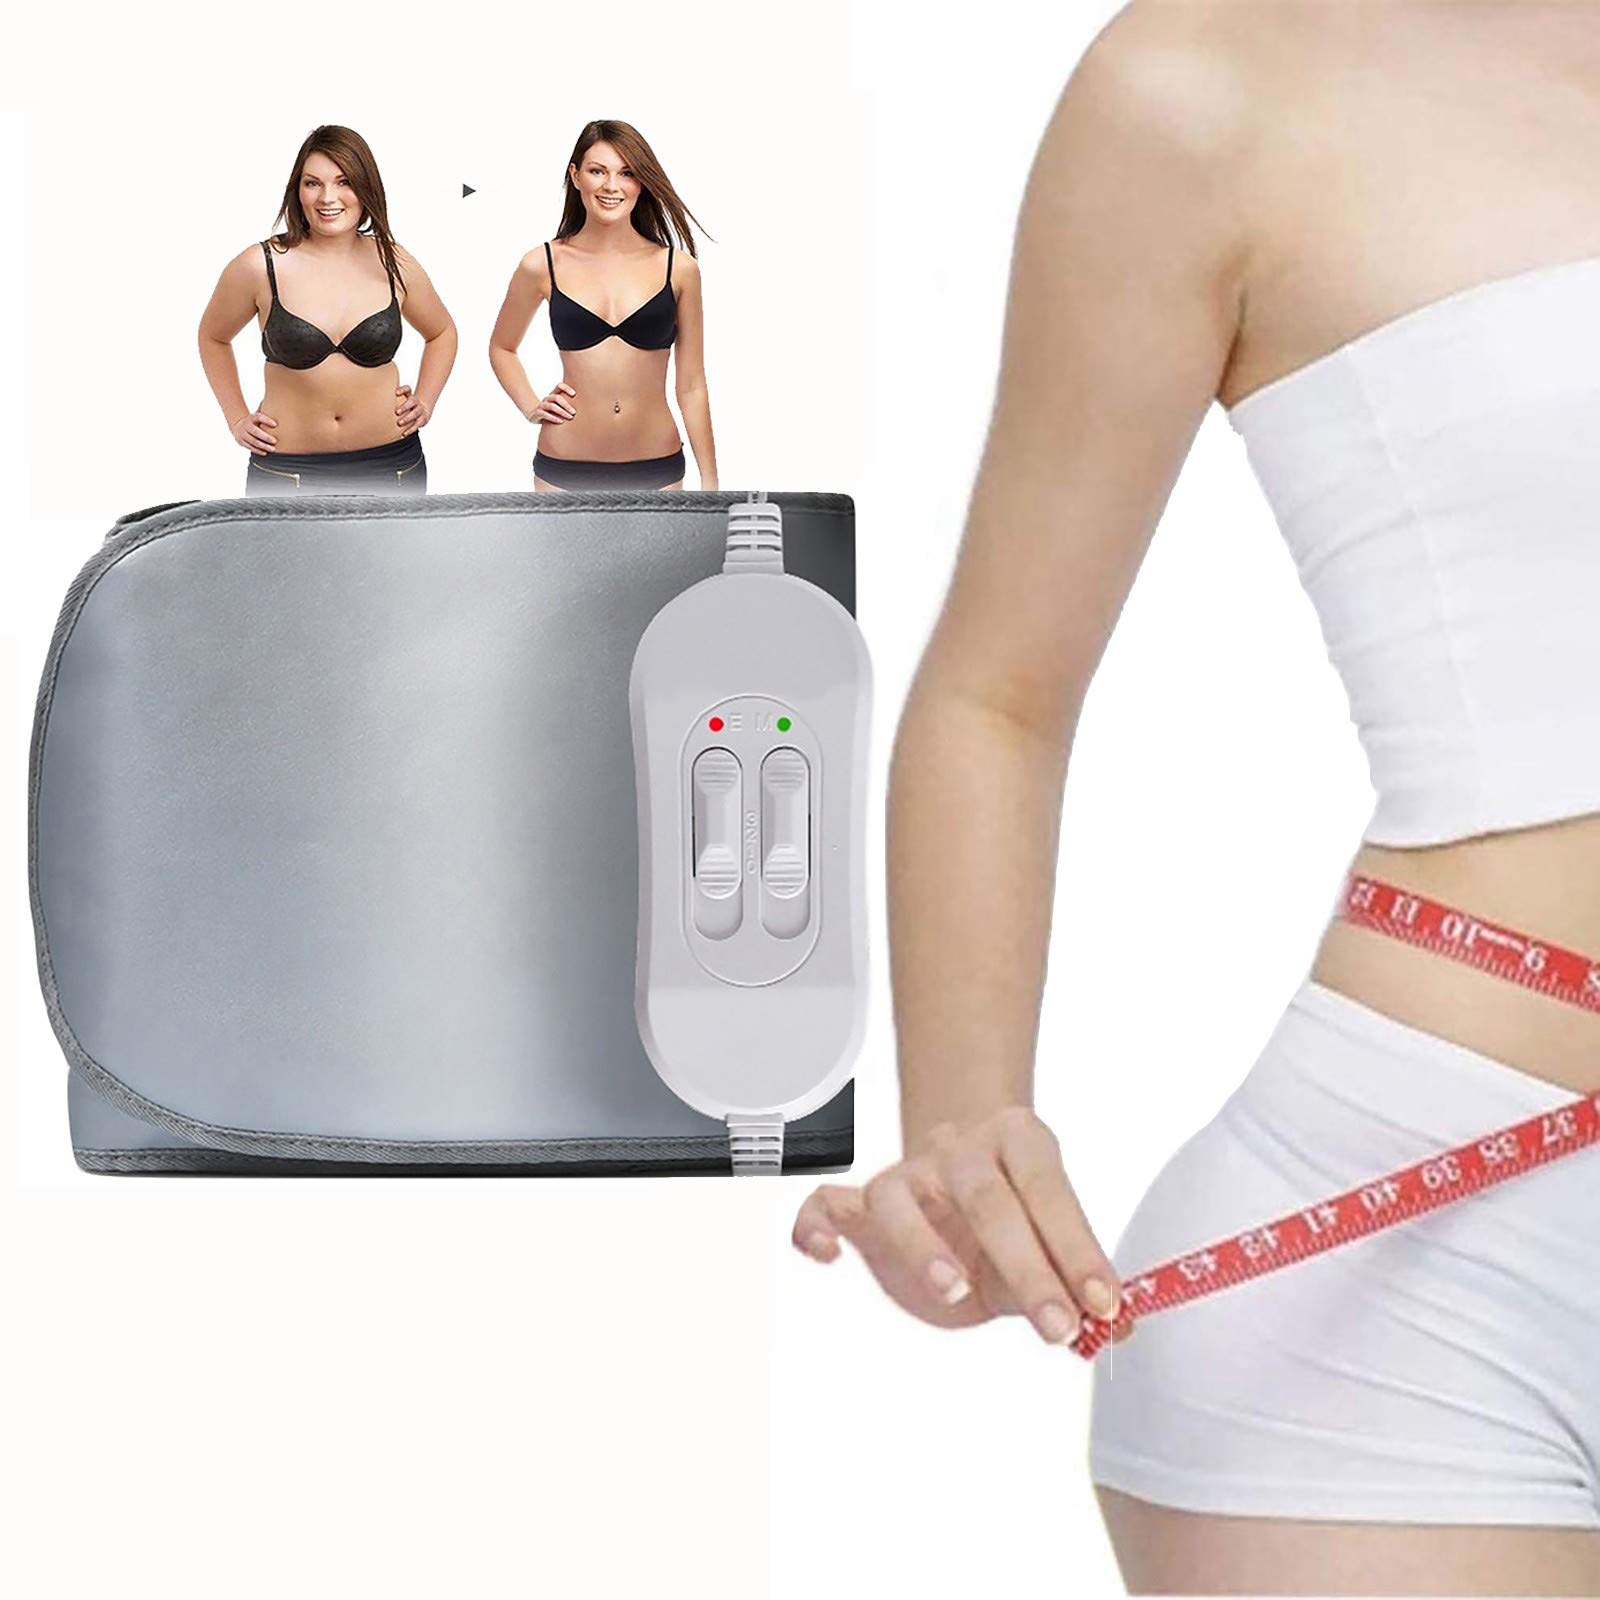 WSND Vibration Massage Weight Lose Belt Far Infrared Heater Sauna Slimming Belt with 2 Motors Weight Losing Health Care Tools for Women and Men